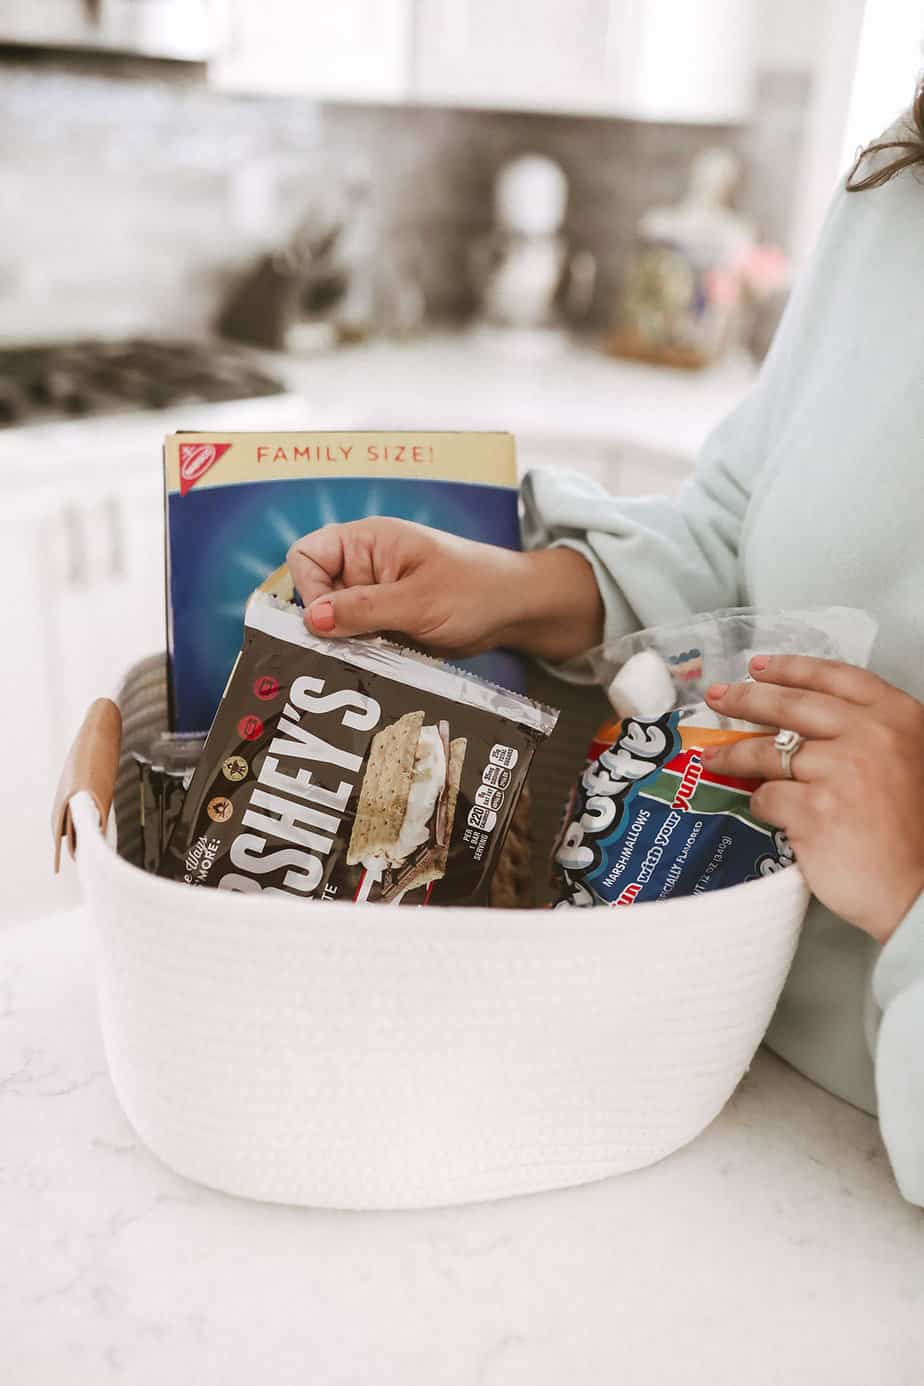 Create Your Own Smores Kit at Home